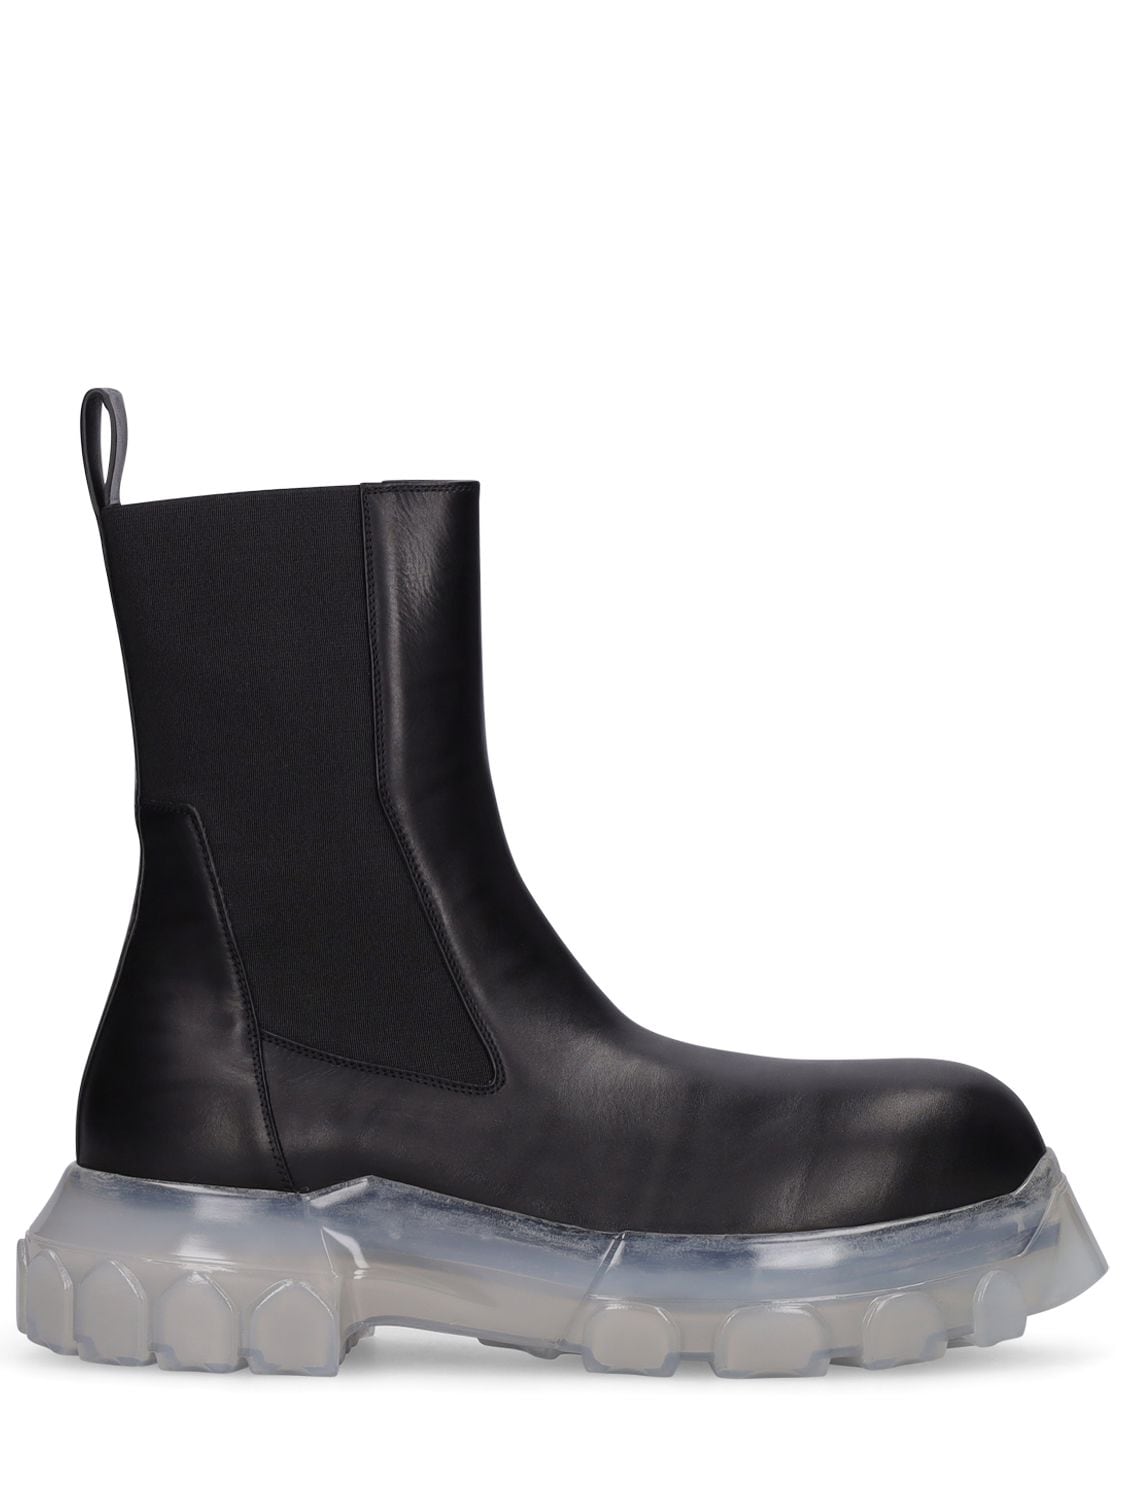 Rick Owens Black Beatle Bozo Tractor Leather Chelsea Boots | ModeSens